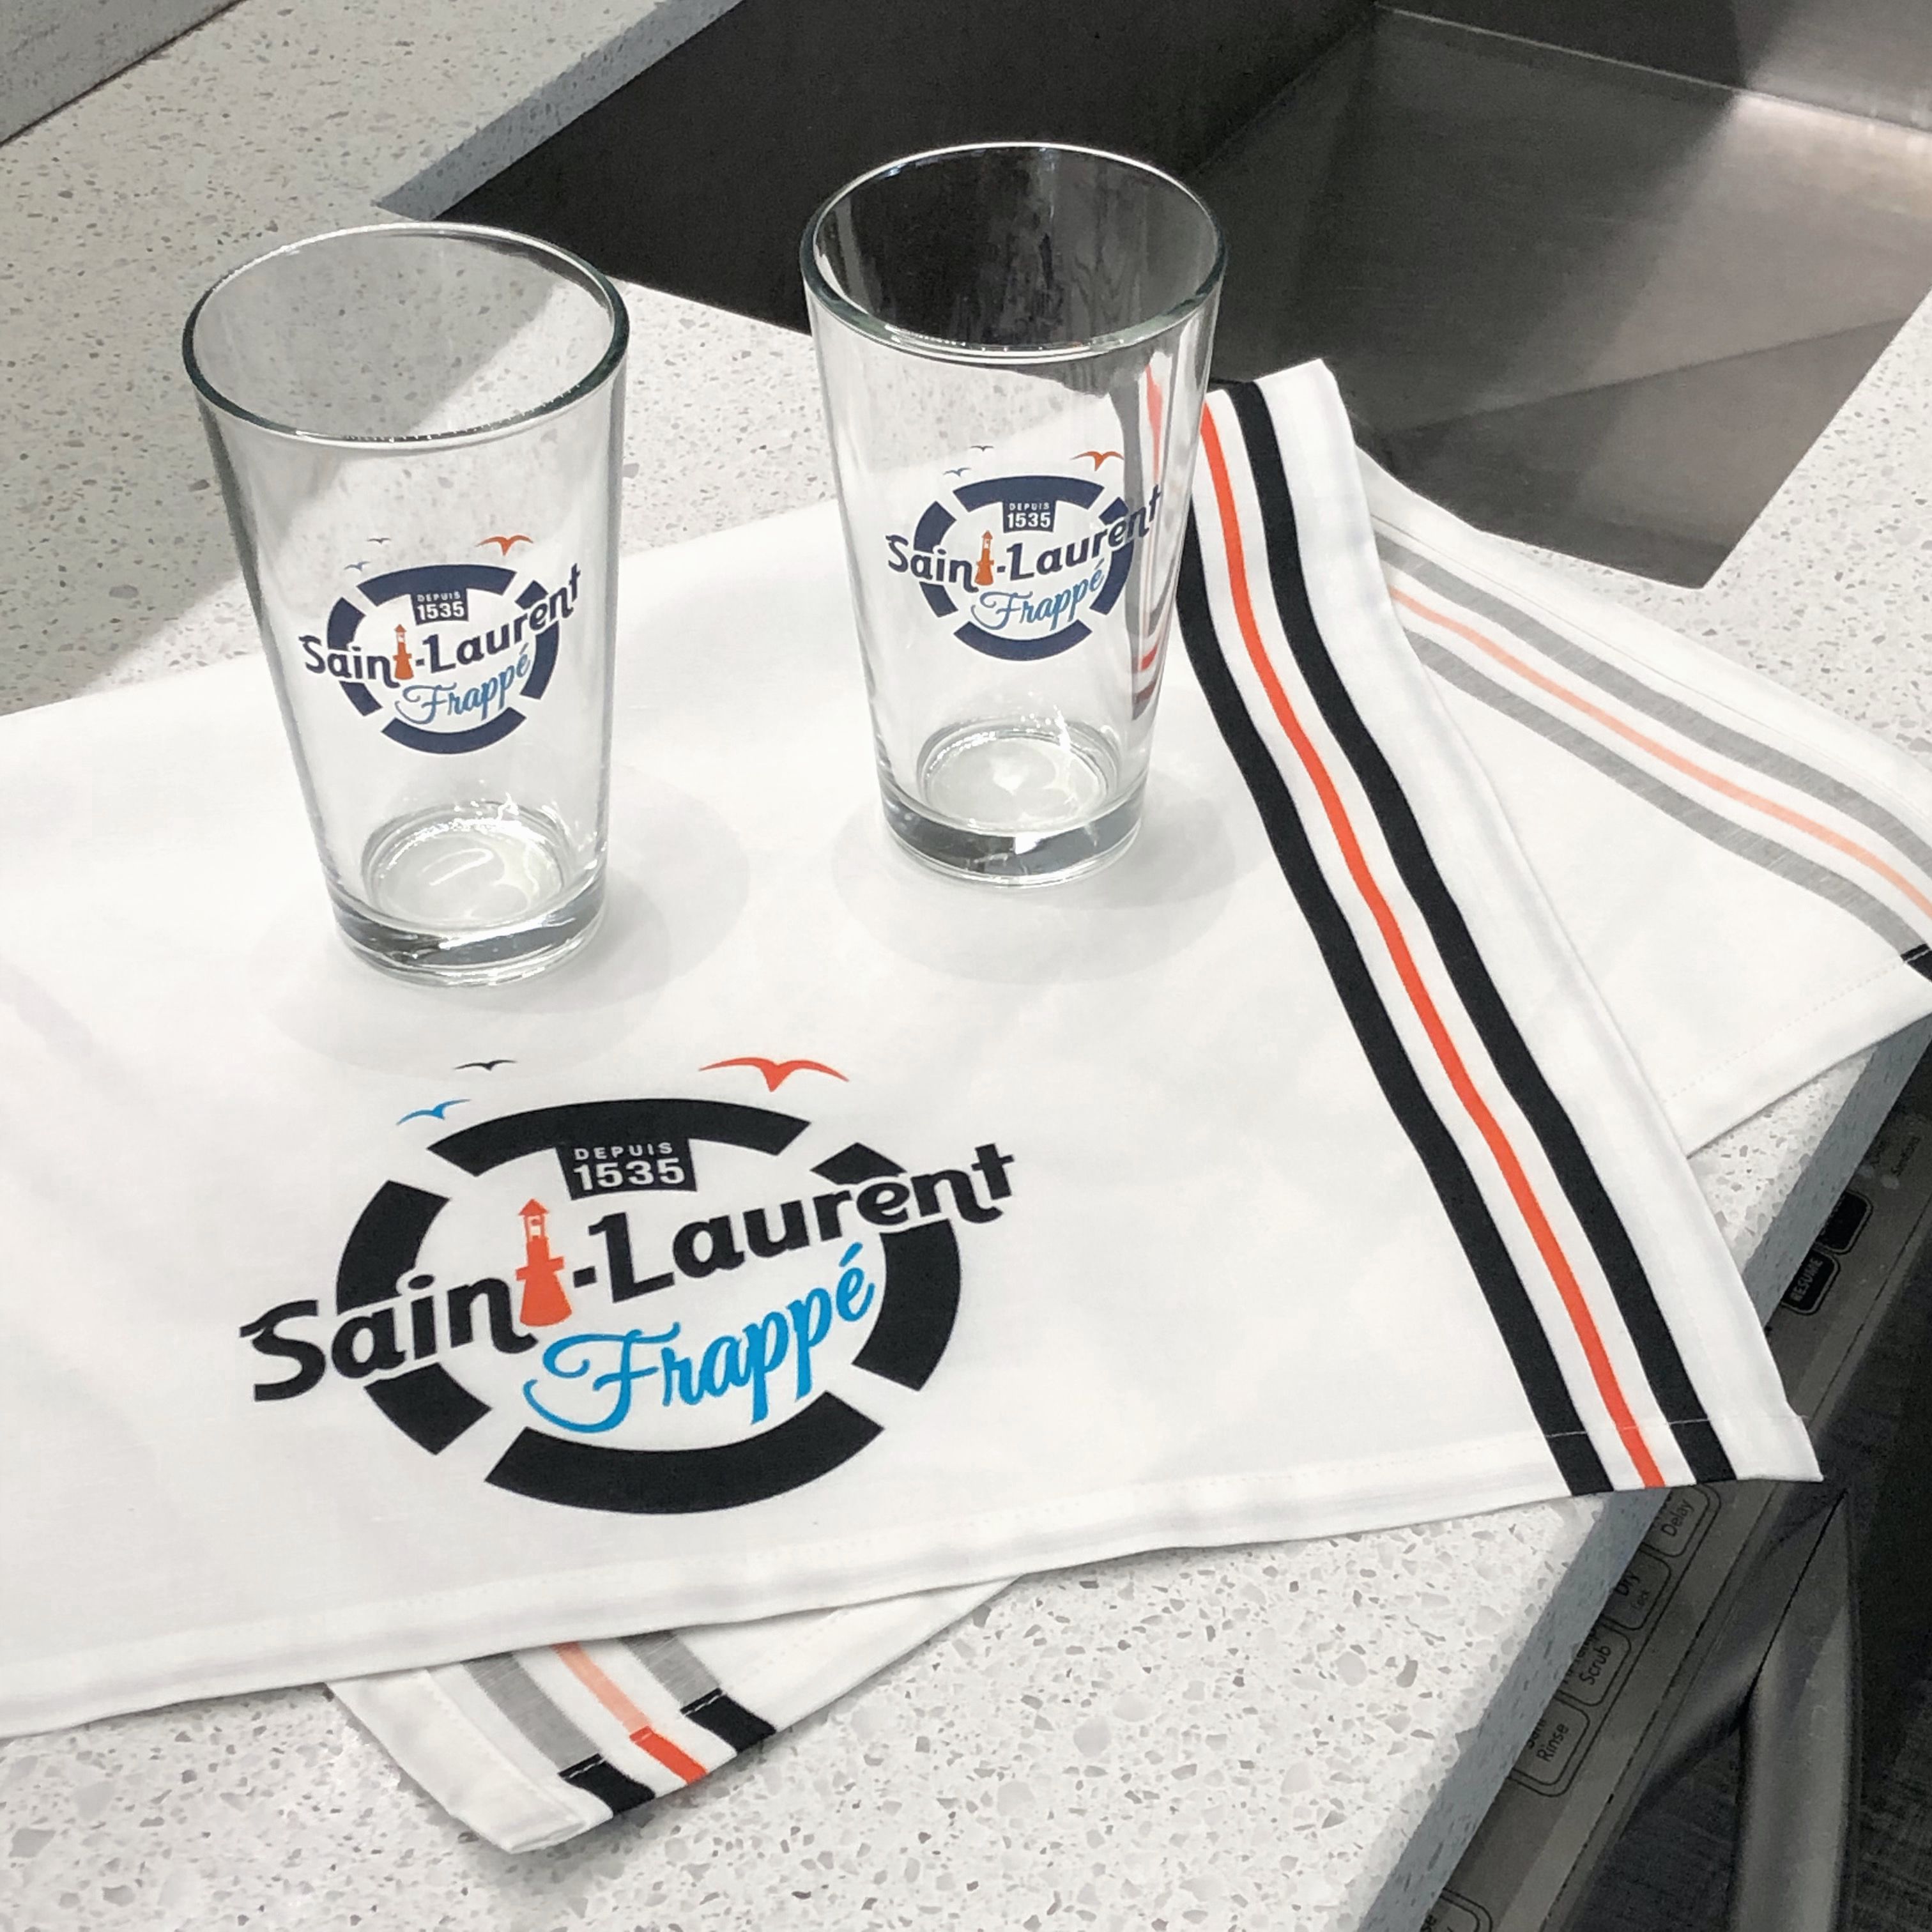 Two pint glasses on top of a tea towel, all three with "Saint-Laurent Frappé" logo